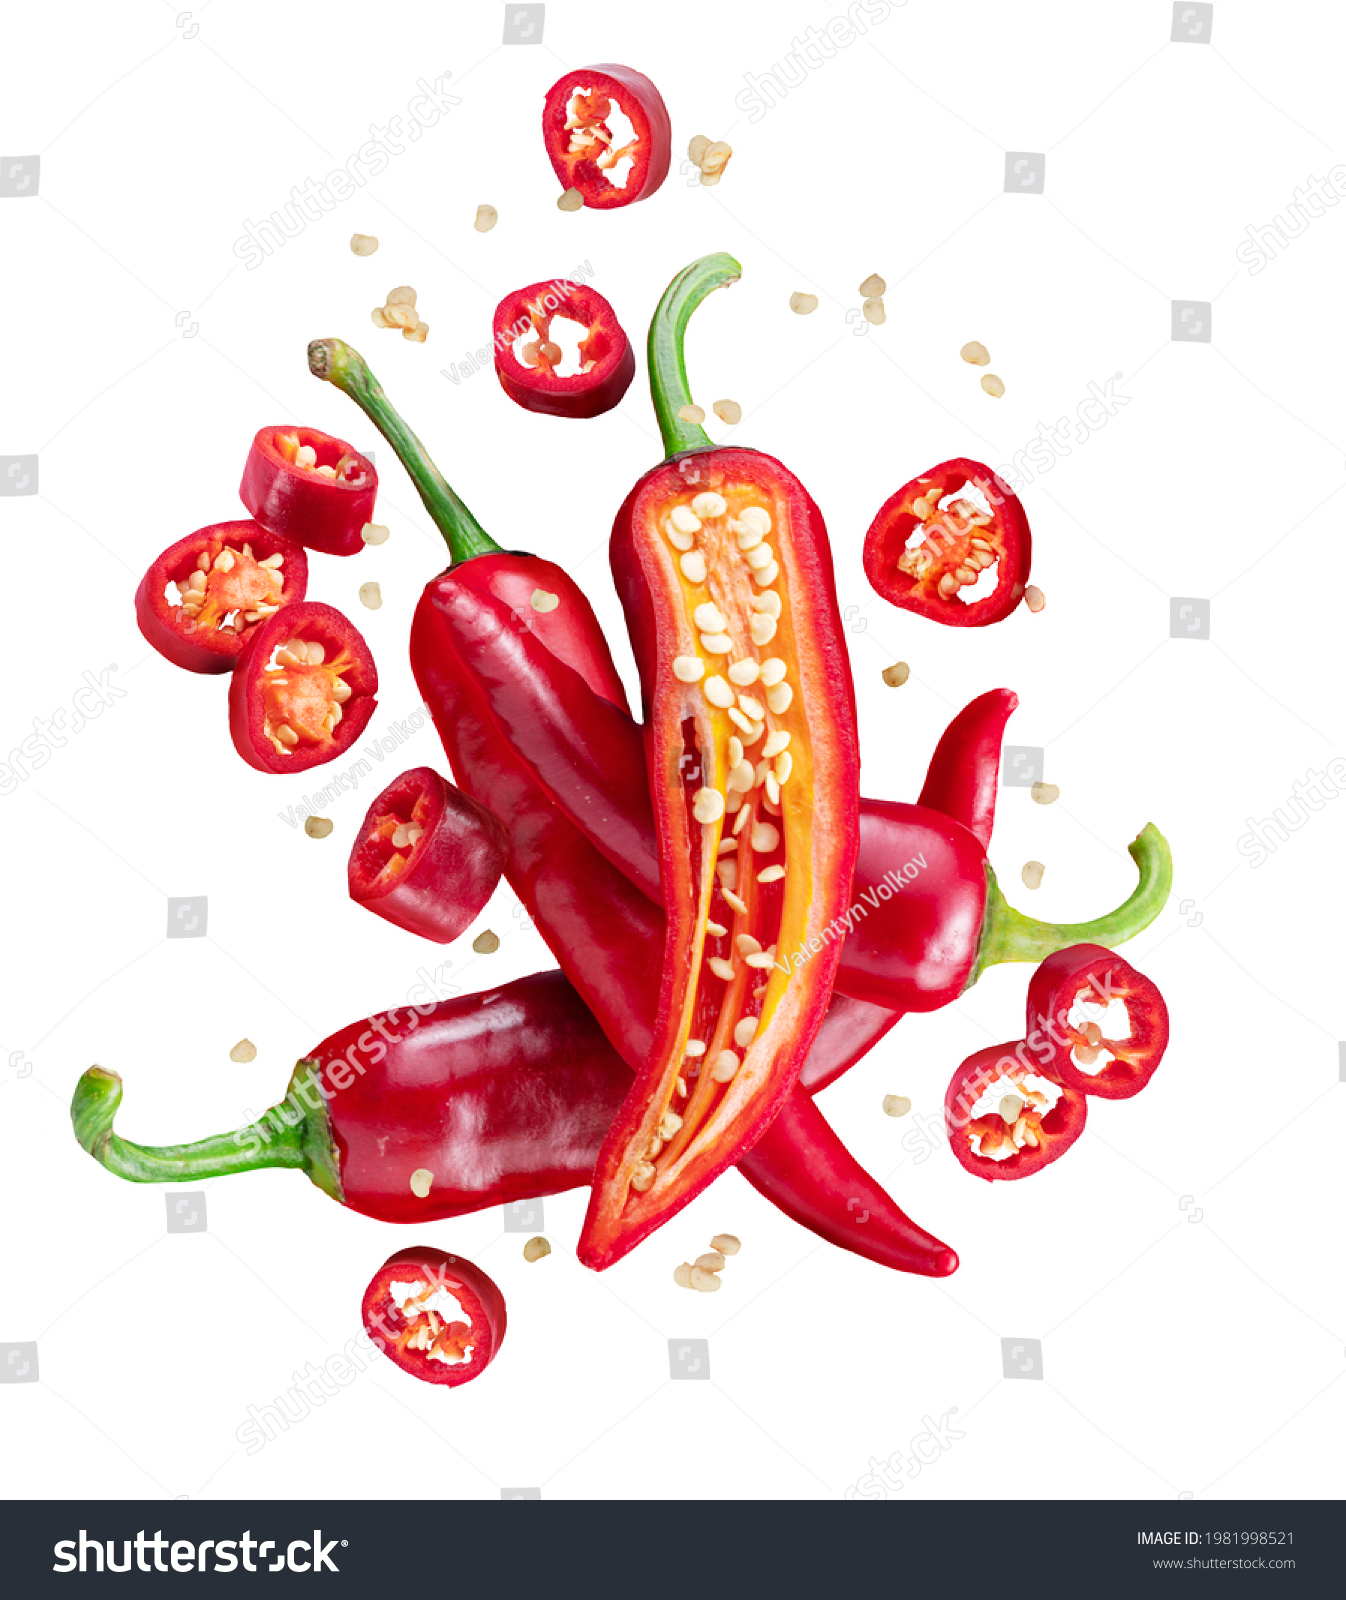 Fresh red chilli peppers and cross sections of chilli pepper with seeds floating in the air. File contains clipping paths. #1981998521